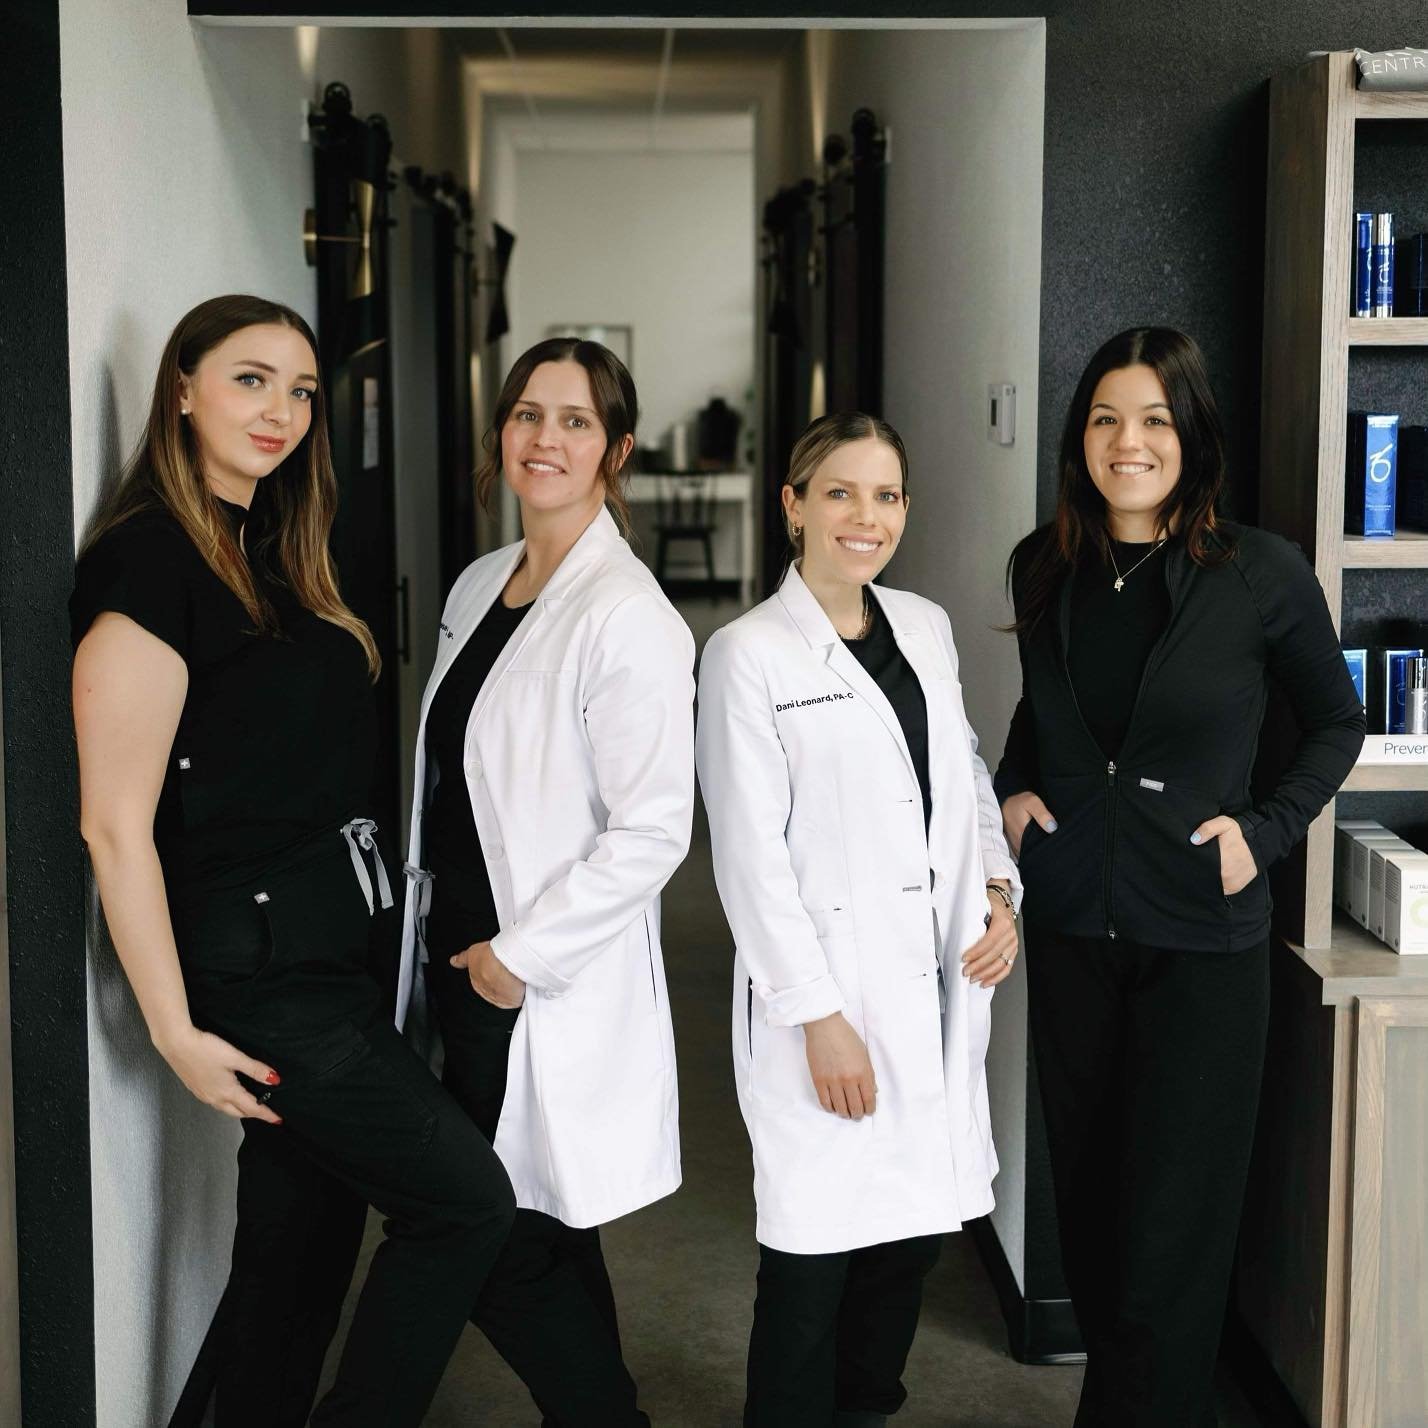 🌟 Our aesthetics dream team! 🌟

At Premier Central MI Medspa, we&rsquo;re more than just professionals &ndash; we&rsquo;re devoted, driven, and educated experts ready to bring out your best self. 💫 

With a passion for perfection and a caring touc